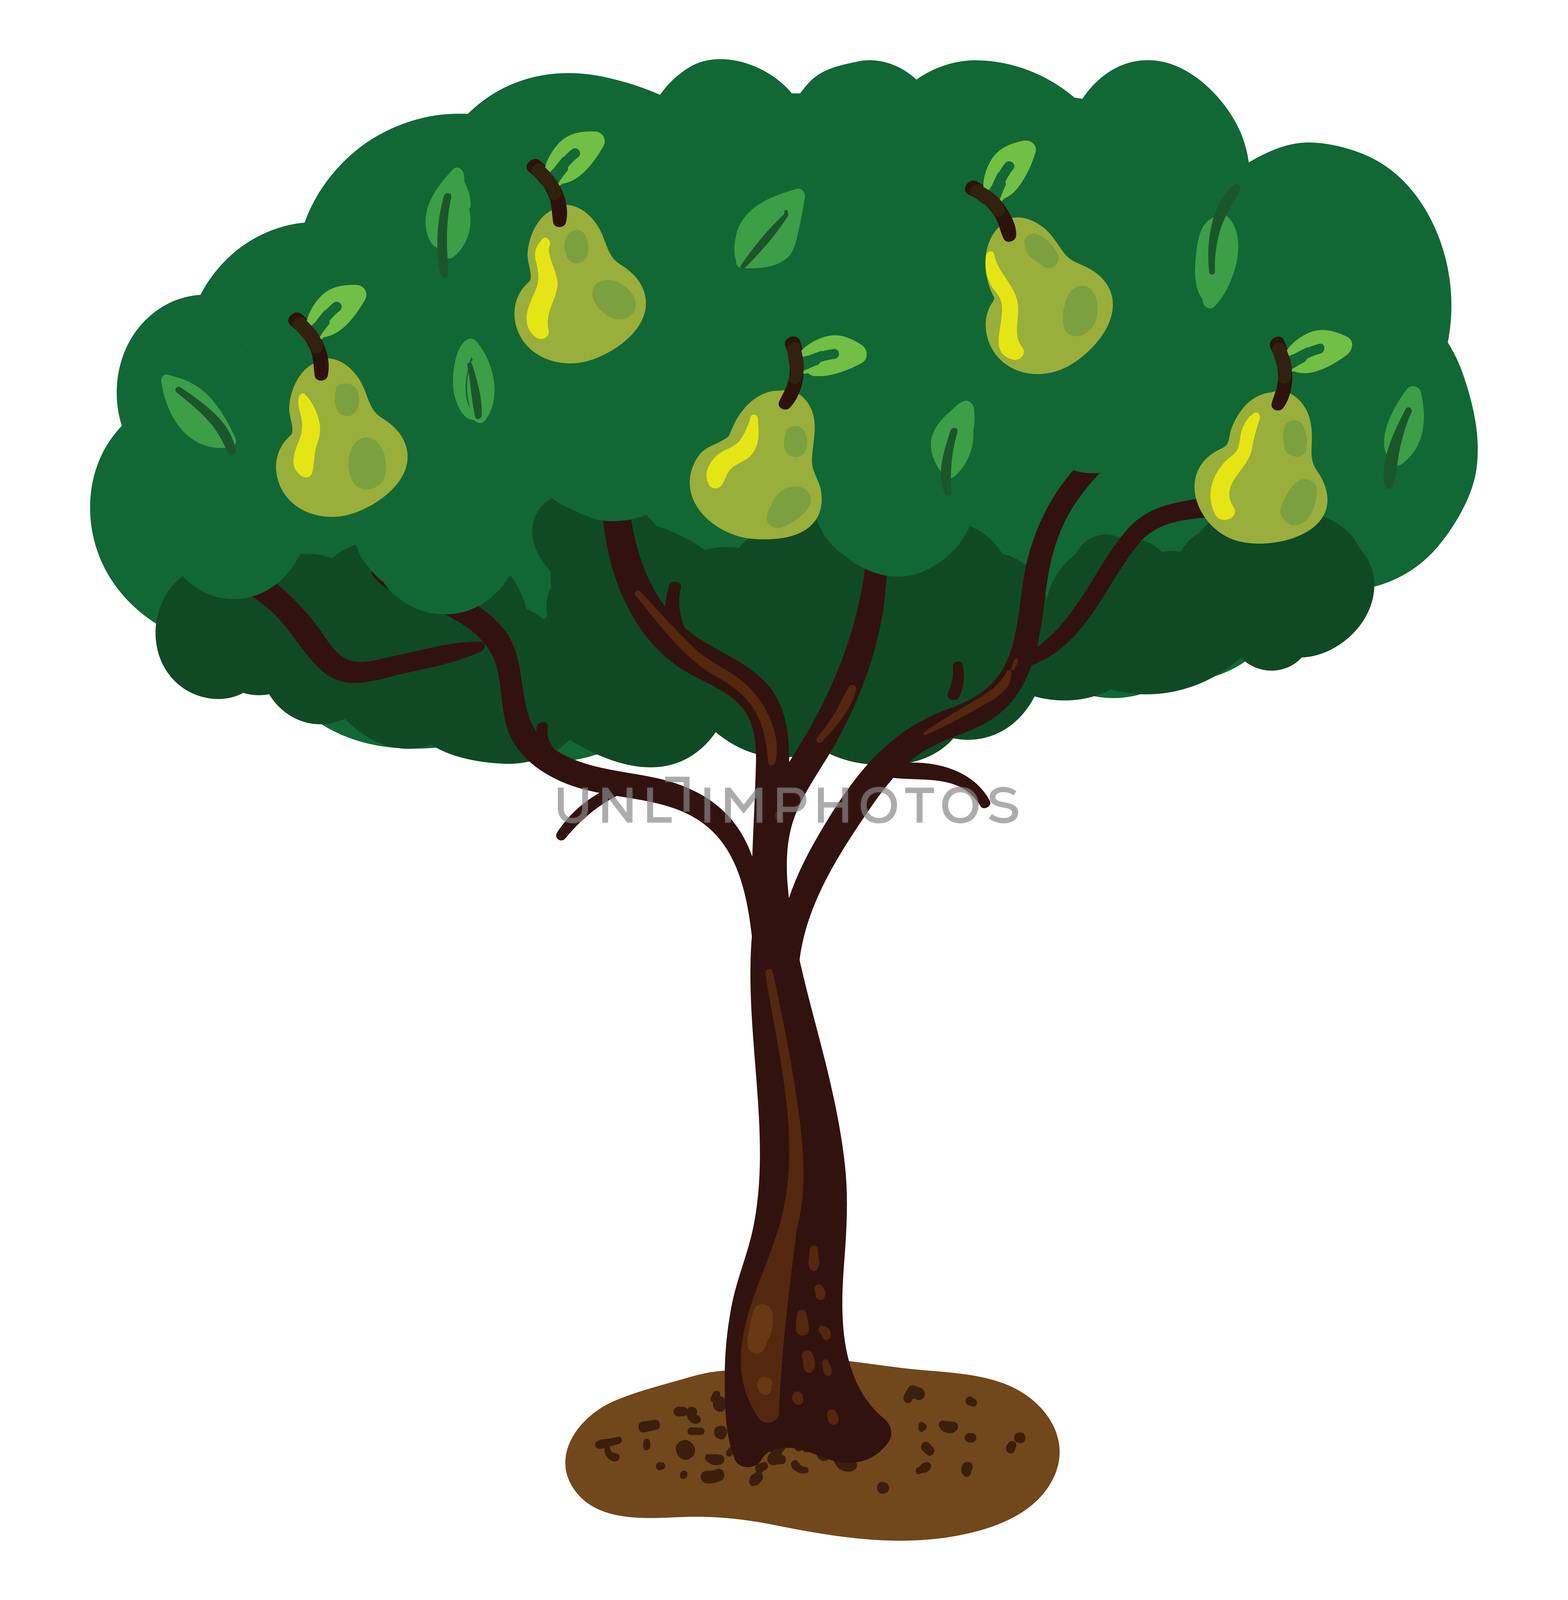 Green pears on tree , illustration, vector on white background by Morphart